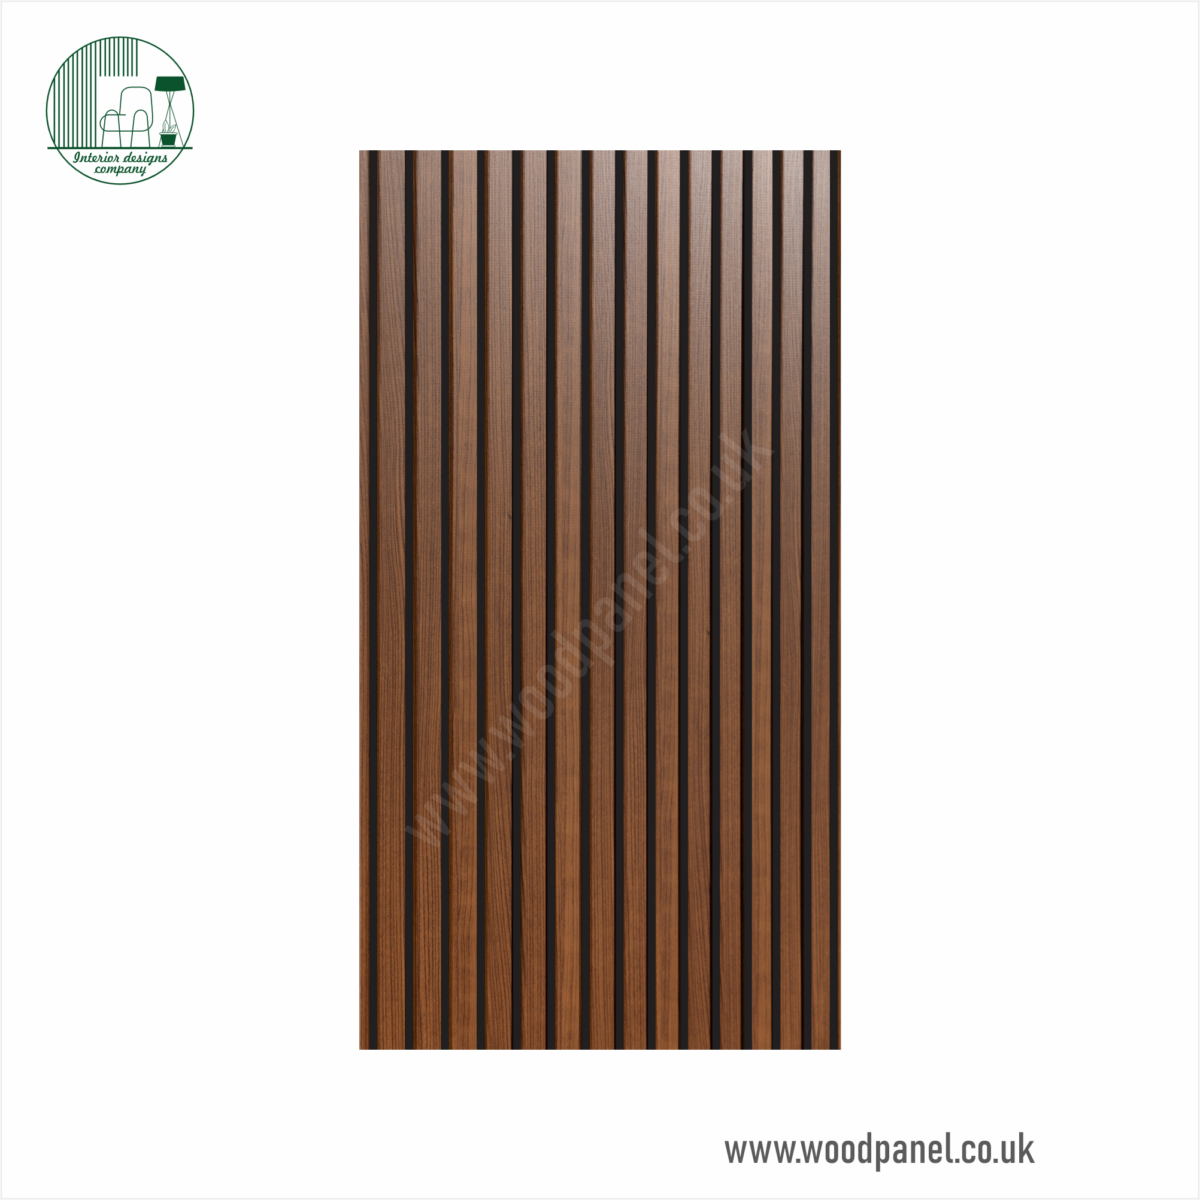 H3734 BLK 120 05 Purity Wood Panel - Natural Dijon Walnut with Black Strip